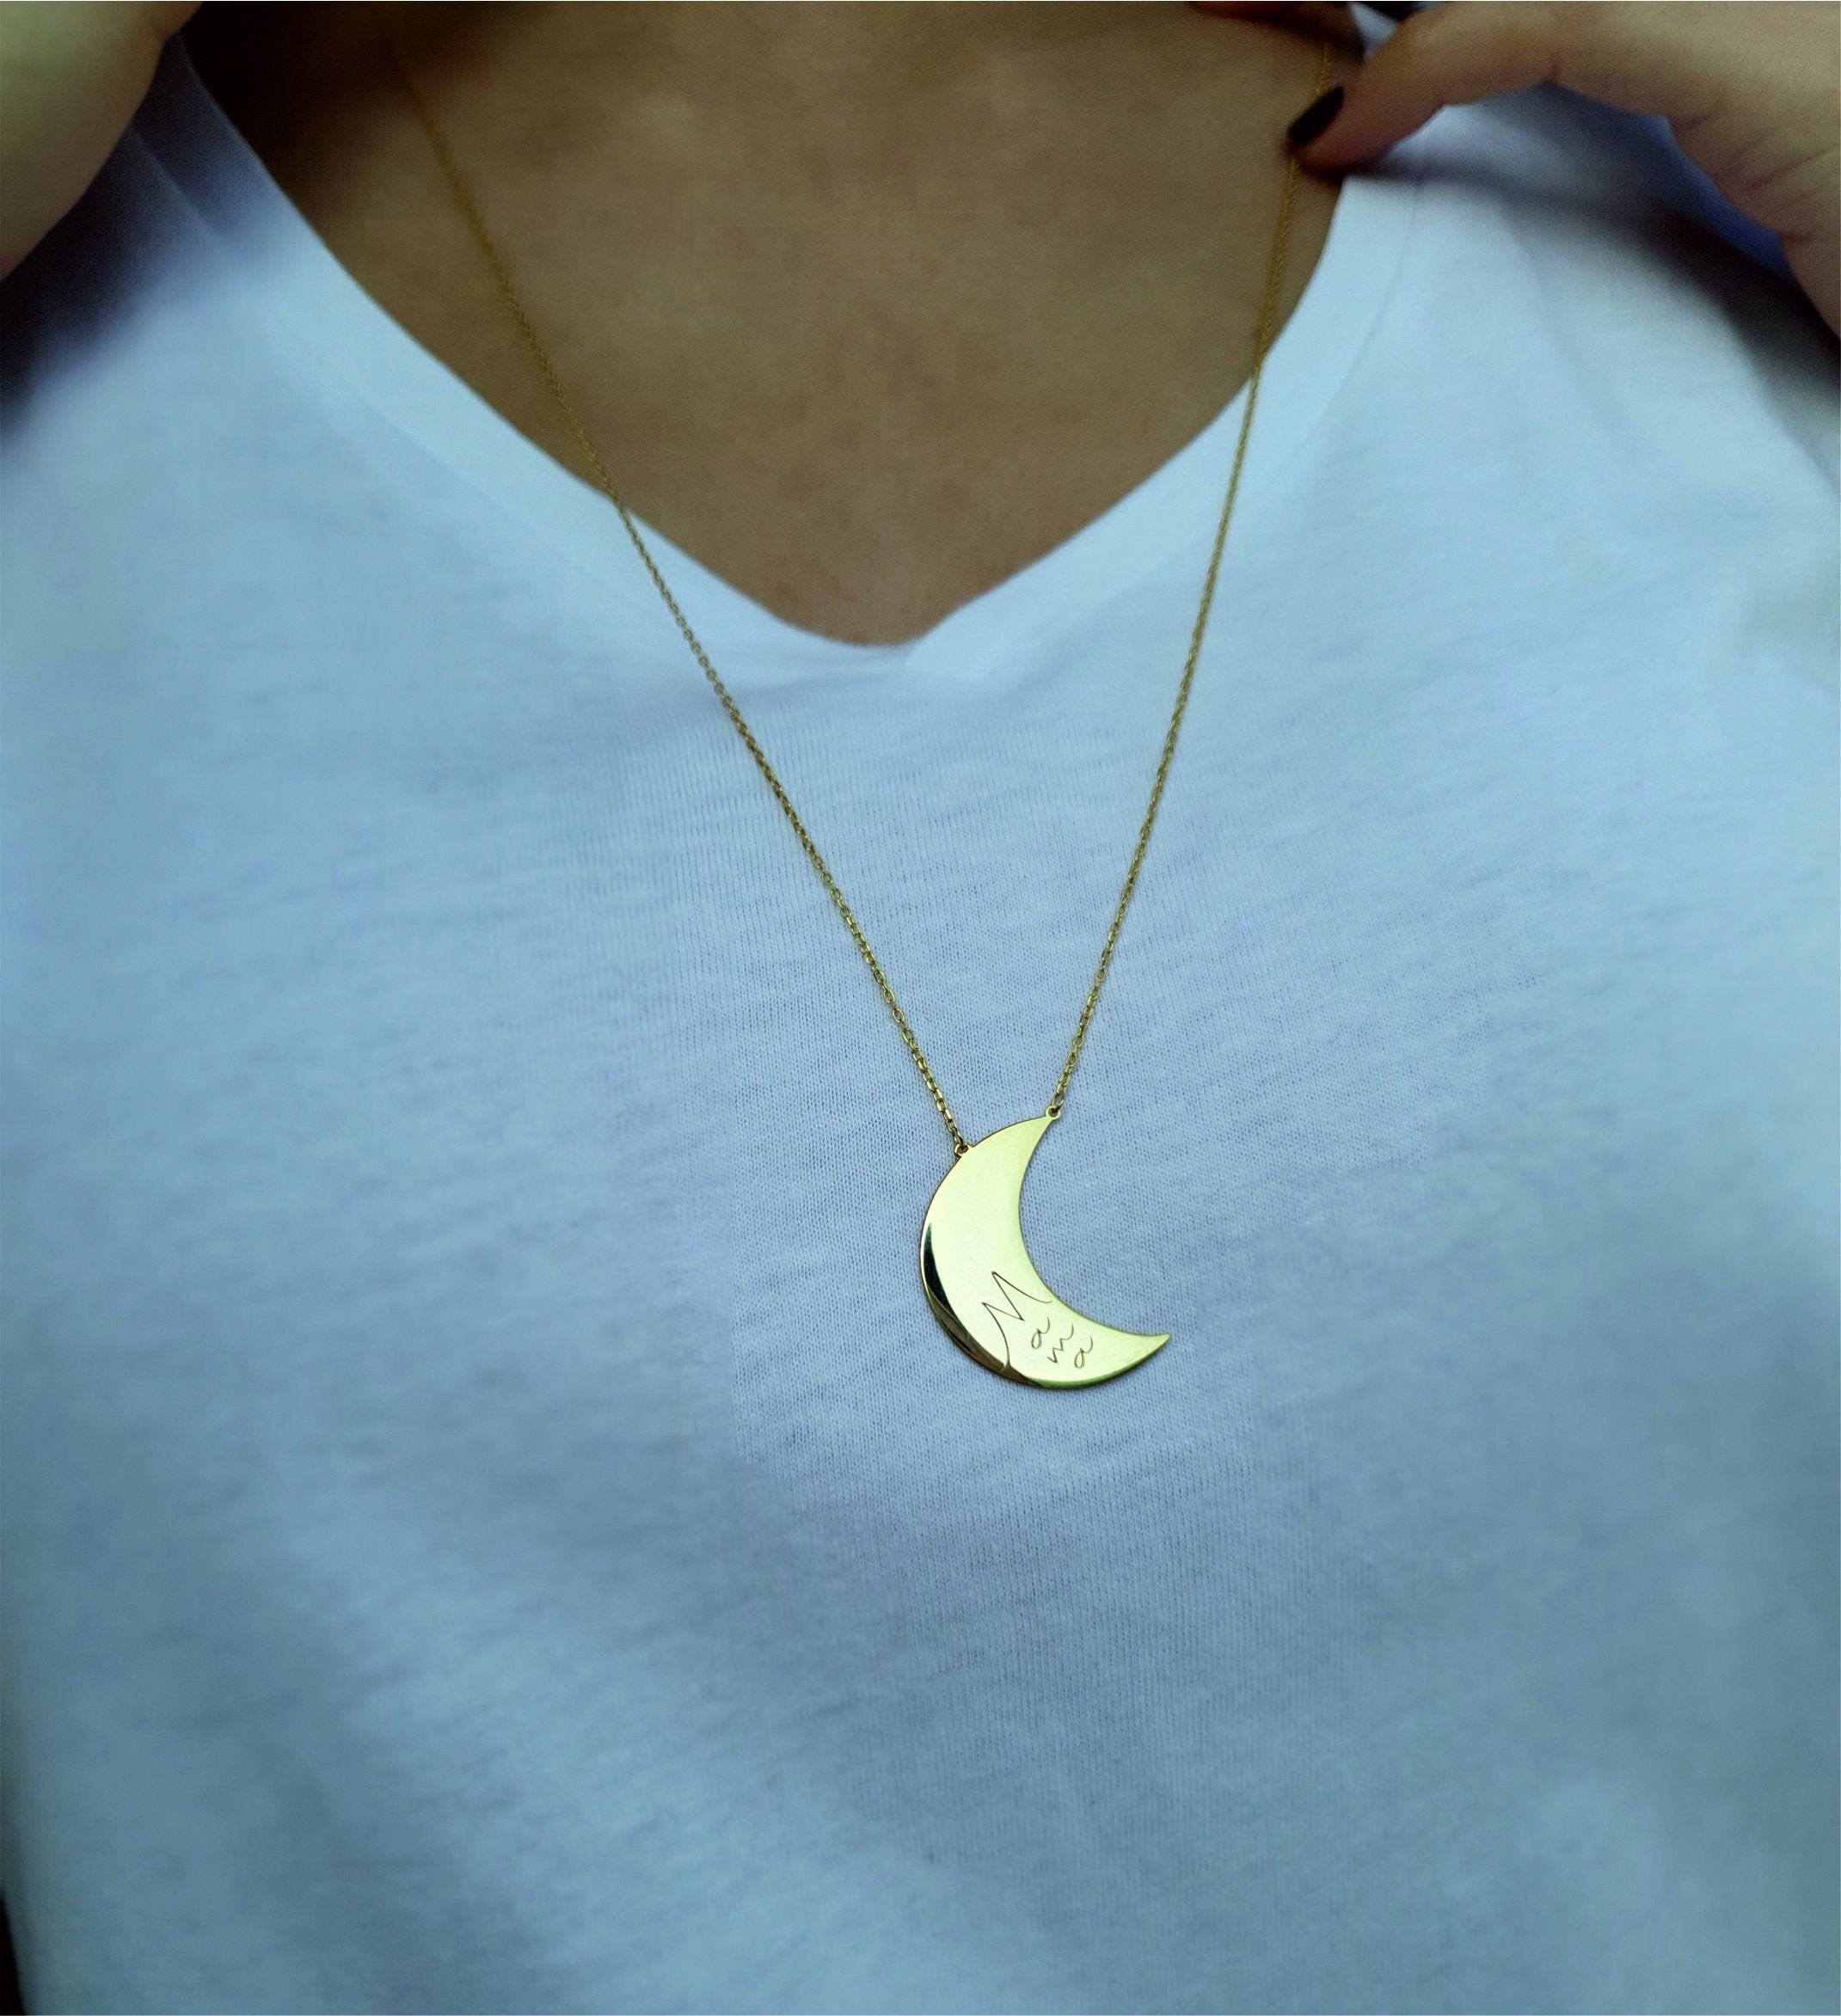 Stevie Nicks Inspired Sterling Silver Crescent Moon Necklace With 18 Inch  Box Chain 925, Waning Crescent Moon, Waxing Crescent Moon Pendant - Etsy |  Crescent moon necklace silver, Moon necklace etsy, Moon necklace